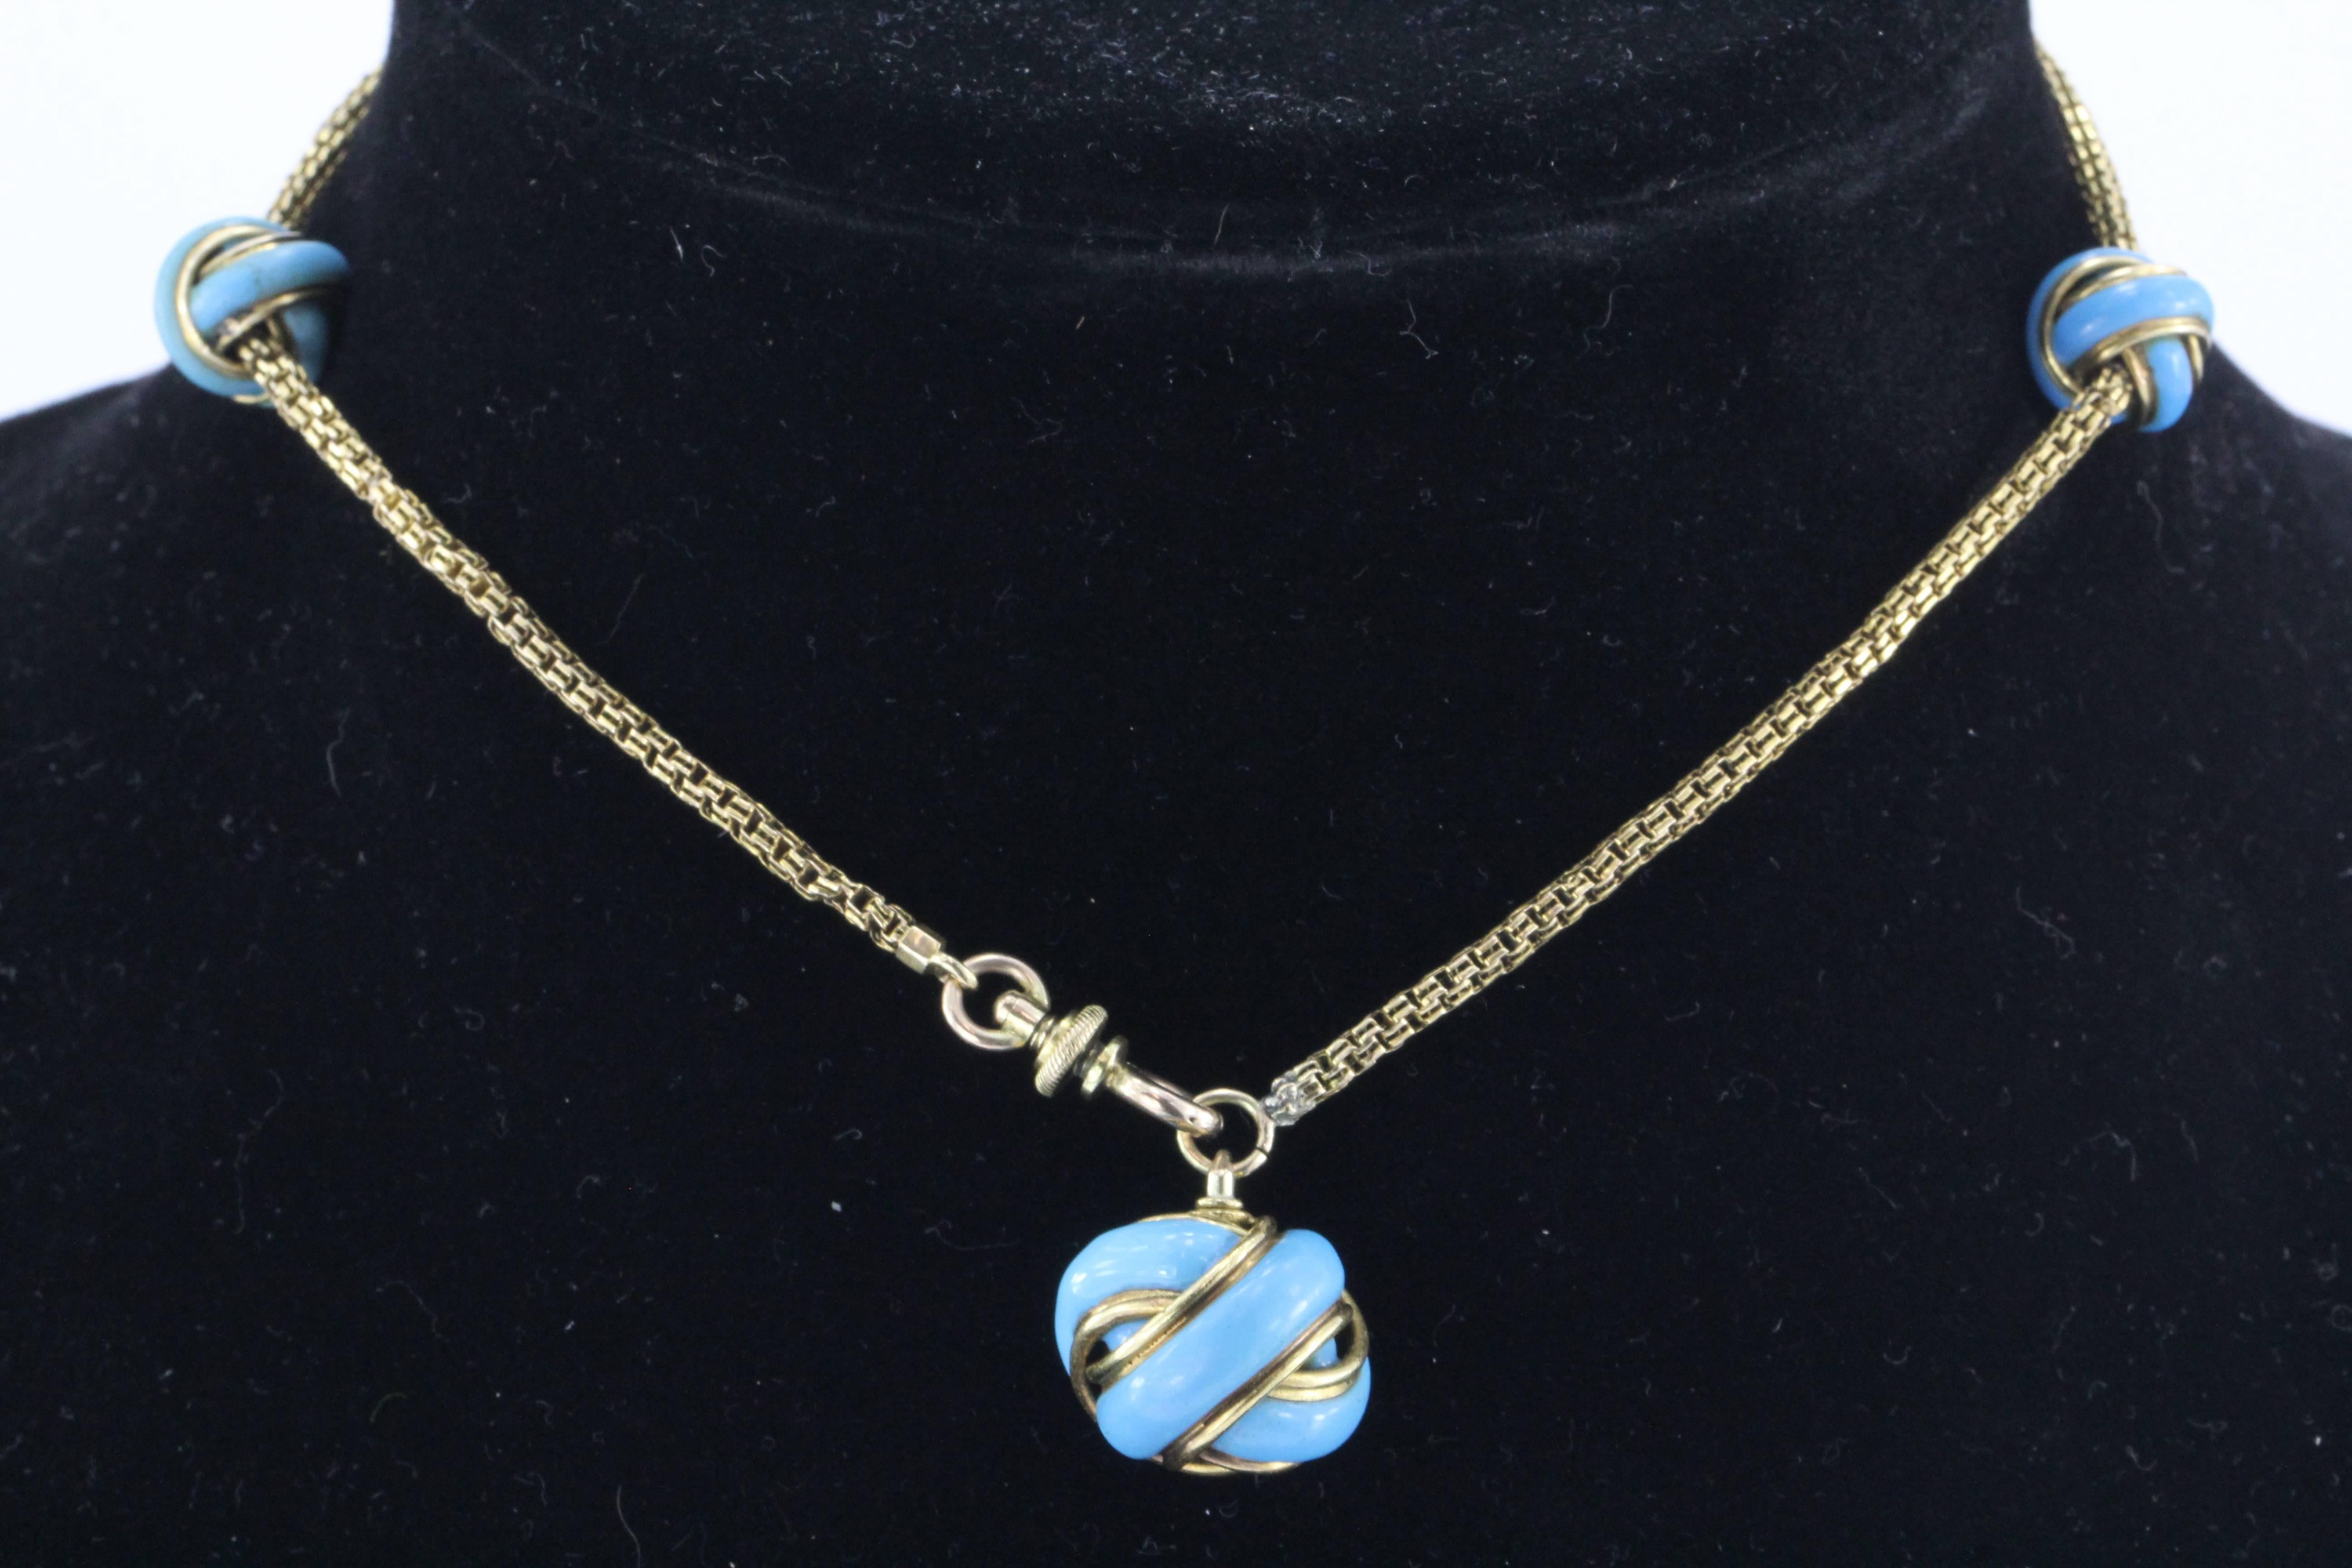 Antique 18K Gold & Turquoise Enamel Watch Chain Conversion Necklace / Bracelet. The piece is in excellent estate condition and ready to wear. There are a few minor nicks to the enamel that are only noticeable upon close examination but there are NO